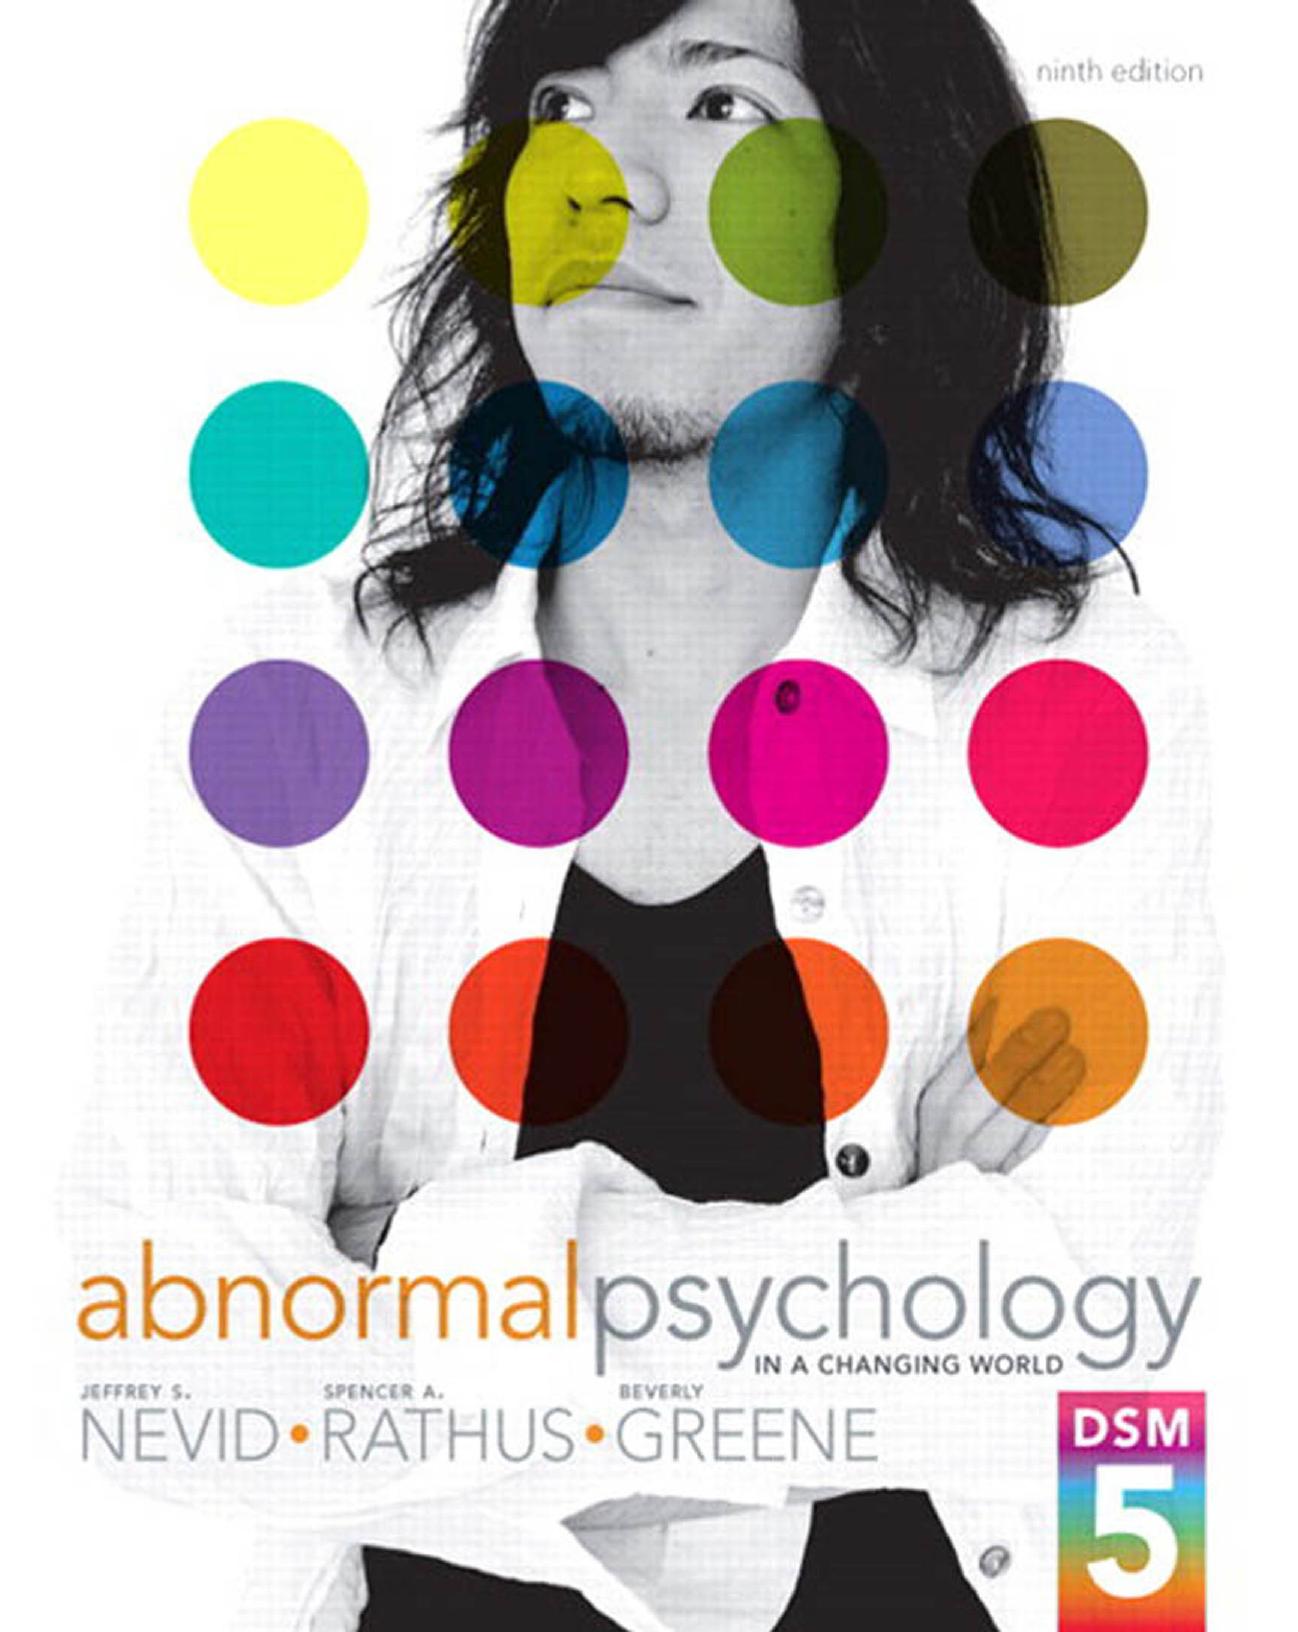 Abnormal Psychology in a Changing World, 9th Edition by  Nevid